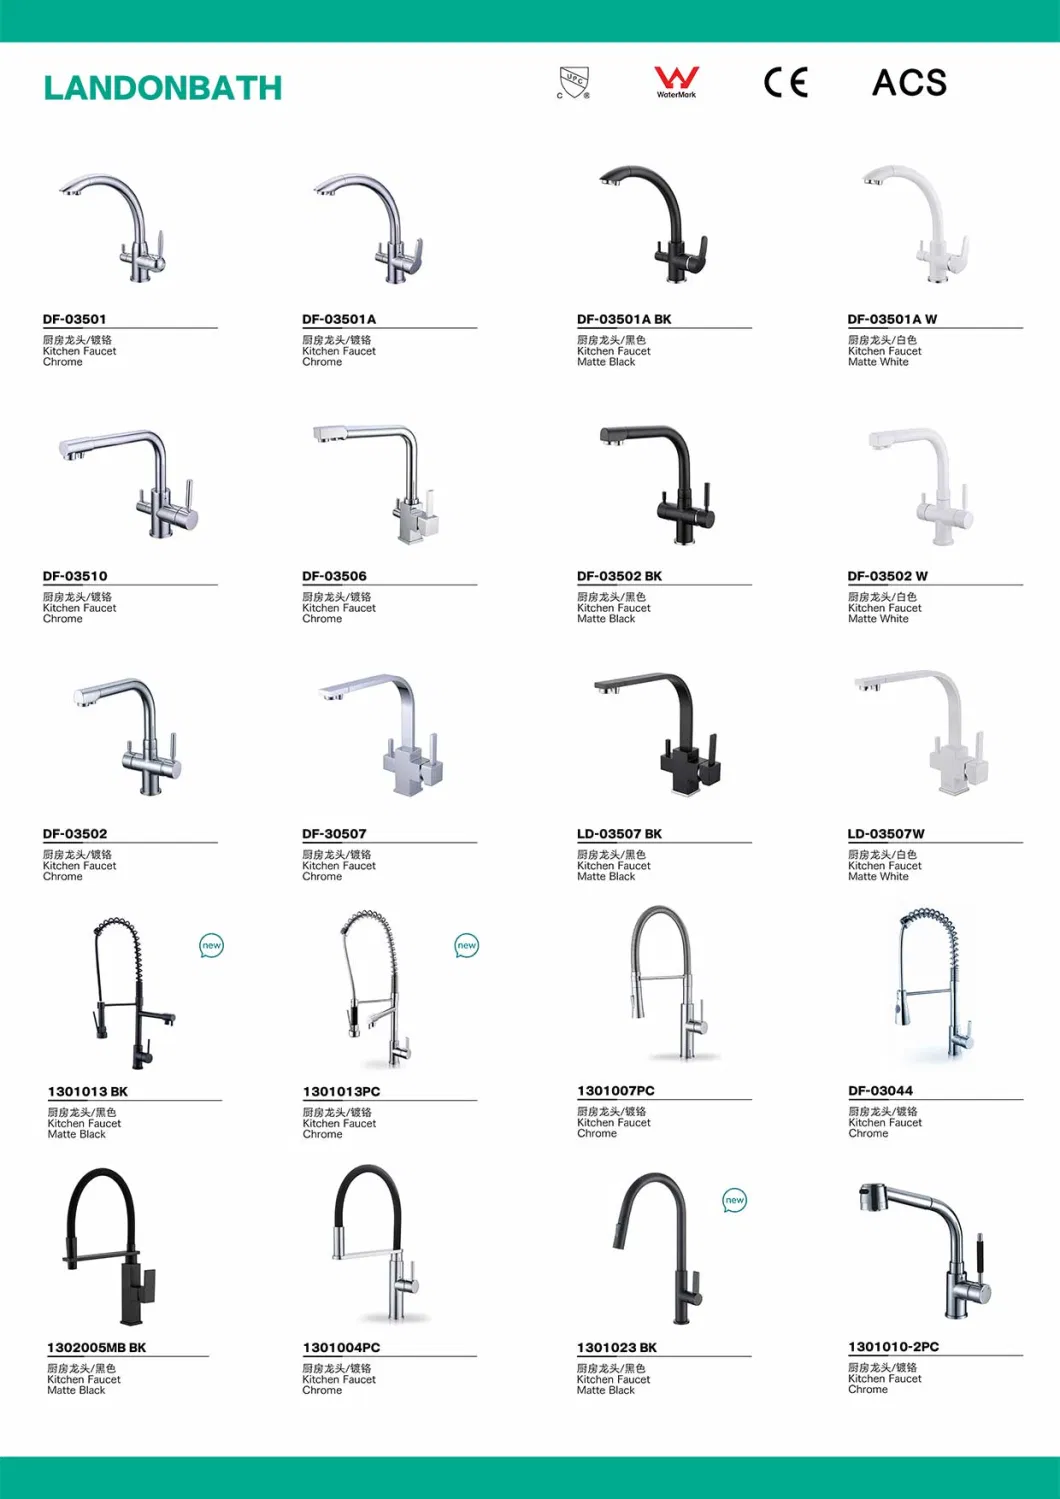 High End Brass Commercial Utility Sink Faucet Deck Mounted Pre-Rinse Unit with 140cm Pre Rinse Hose